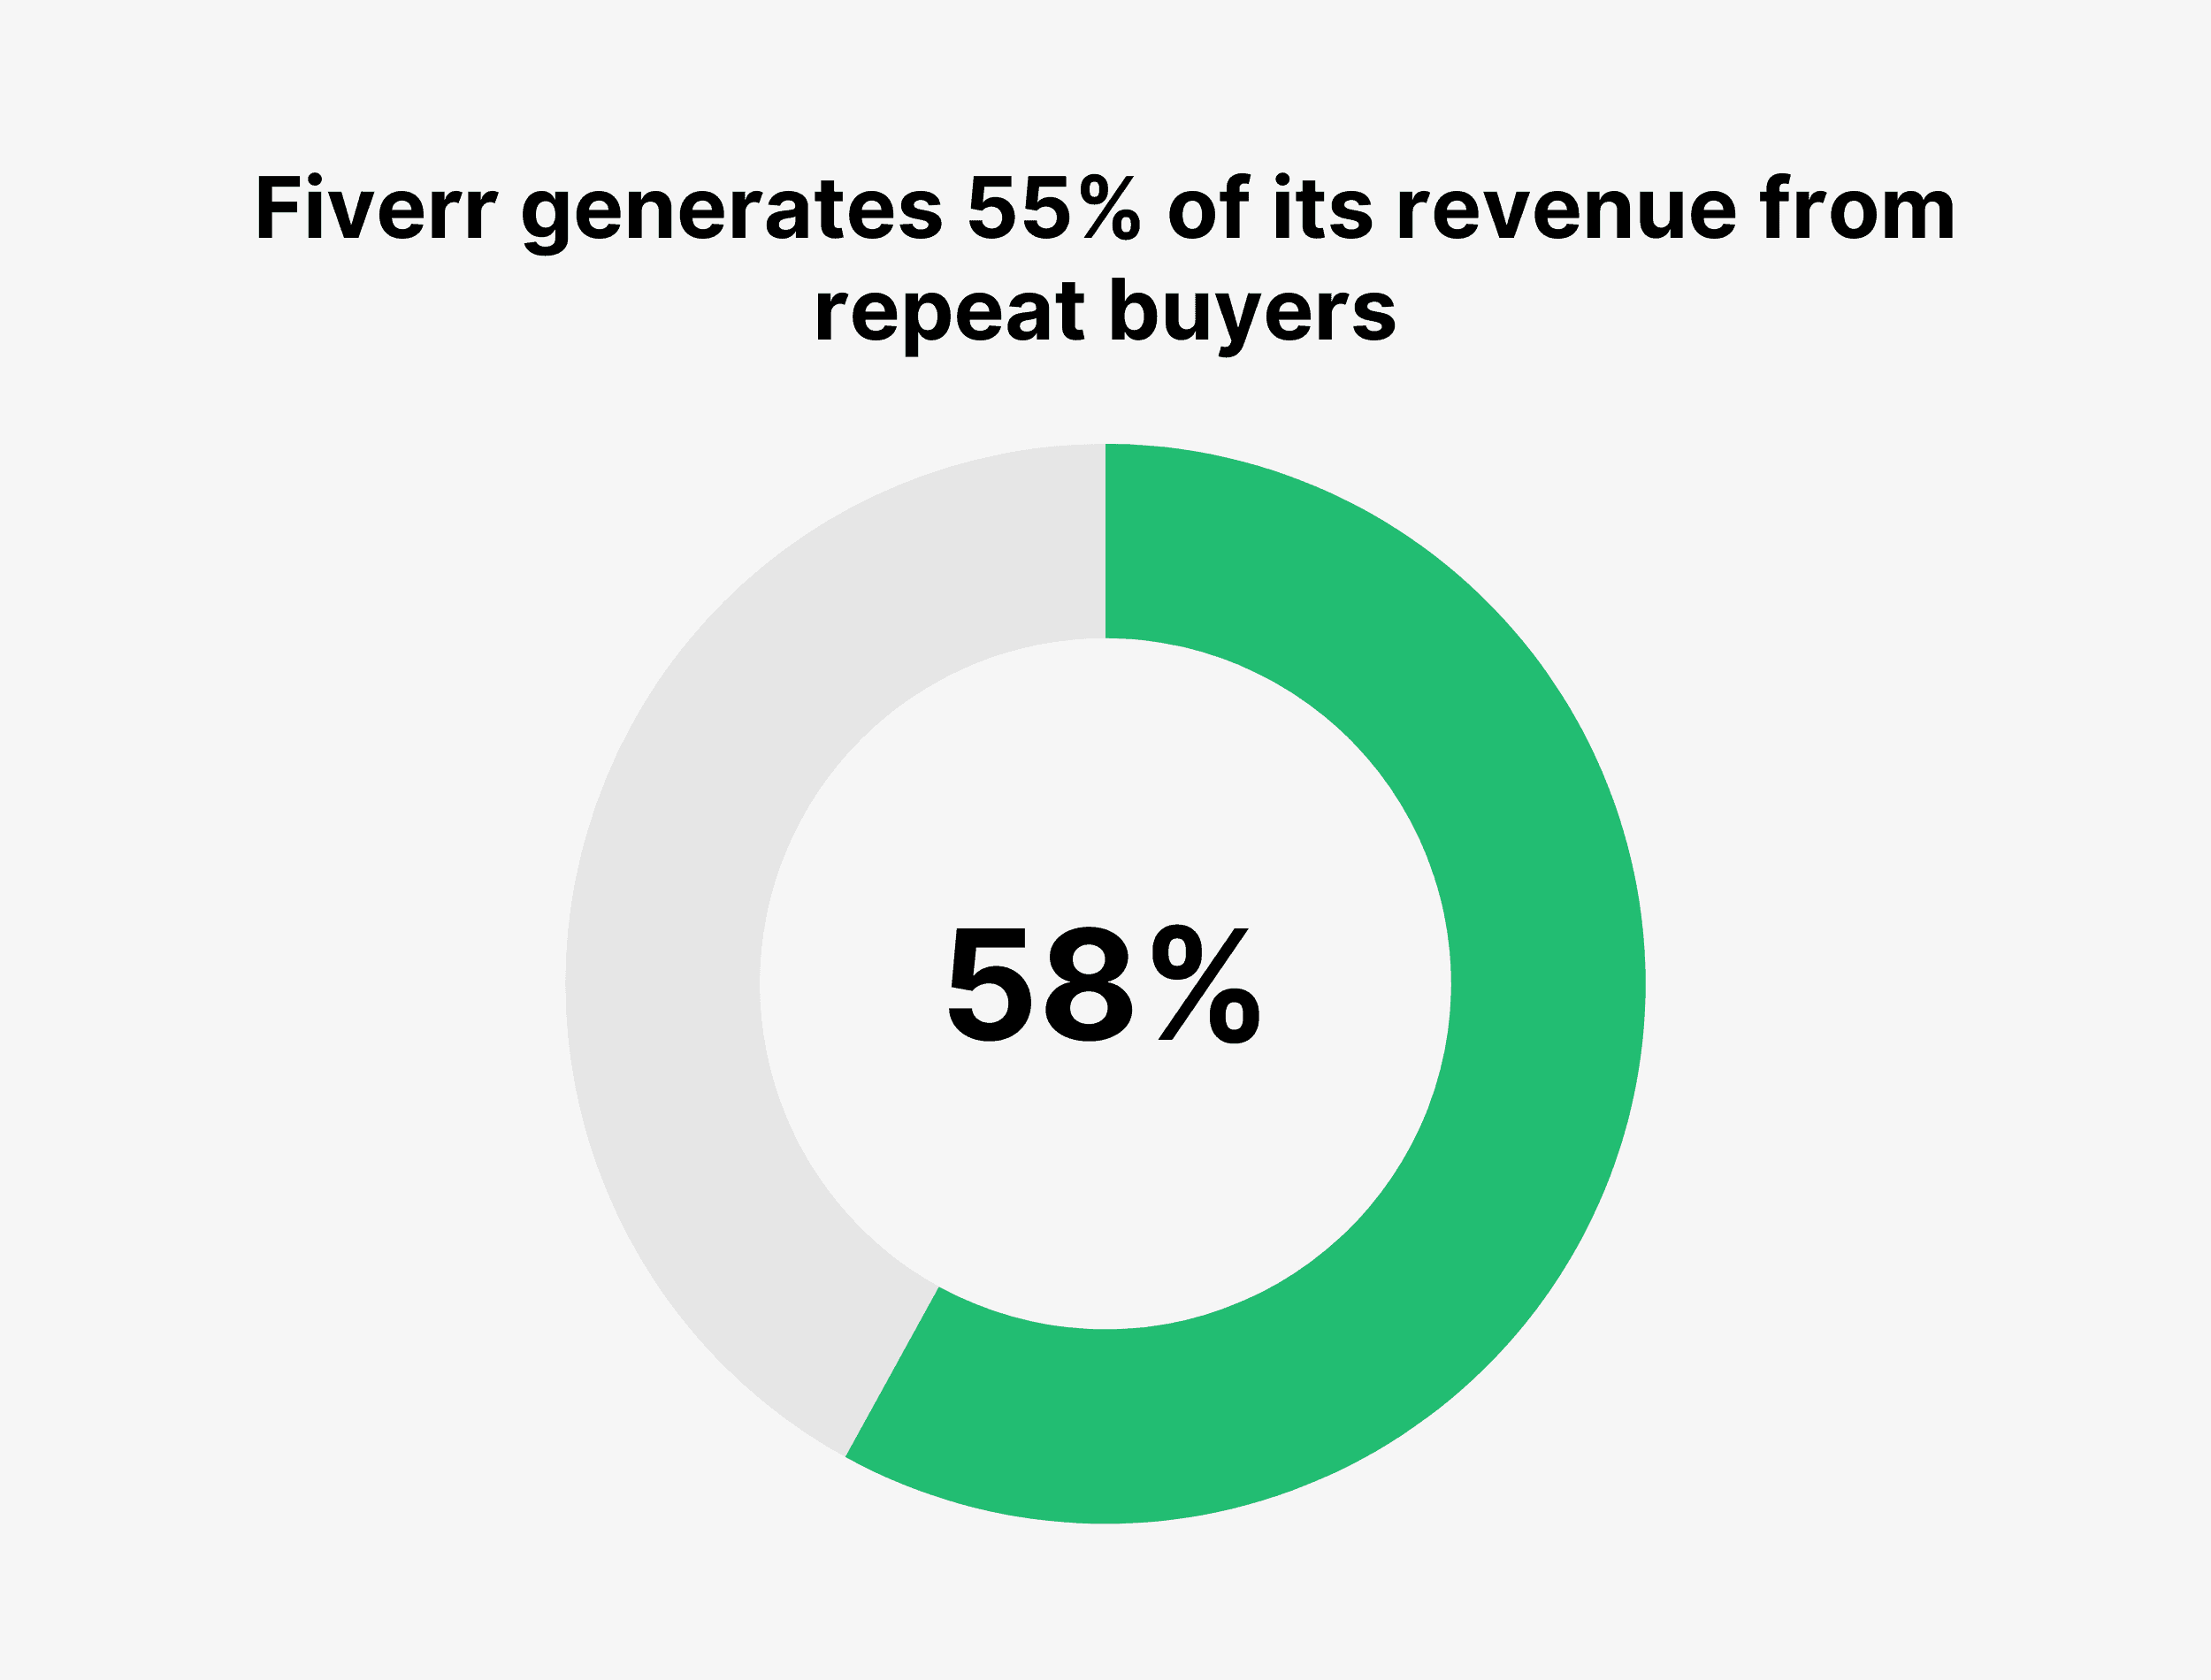 Fiverr generates 55% of its revenue from repeat buyers